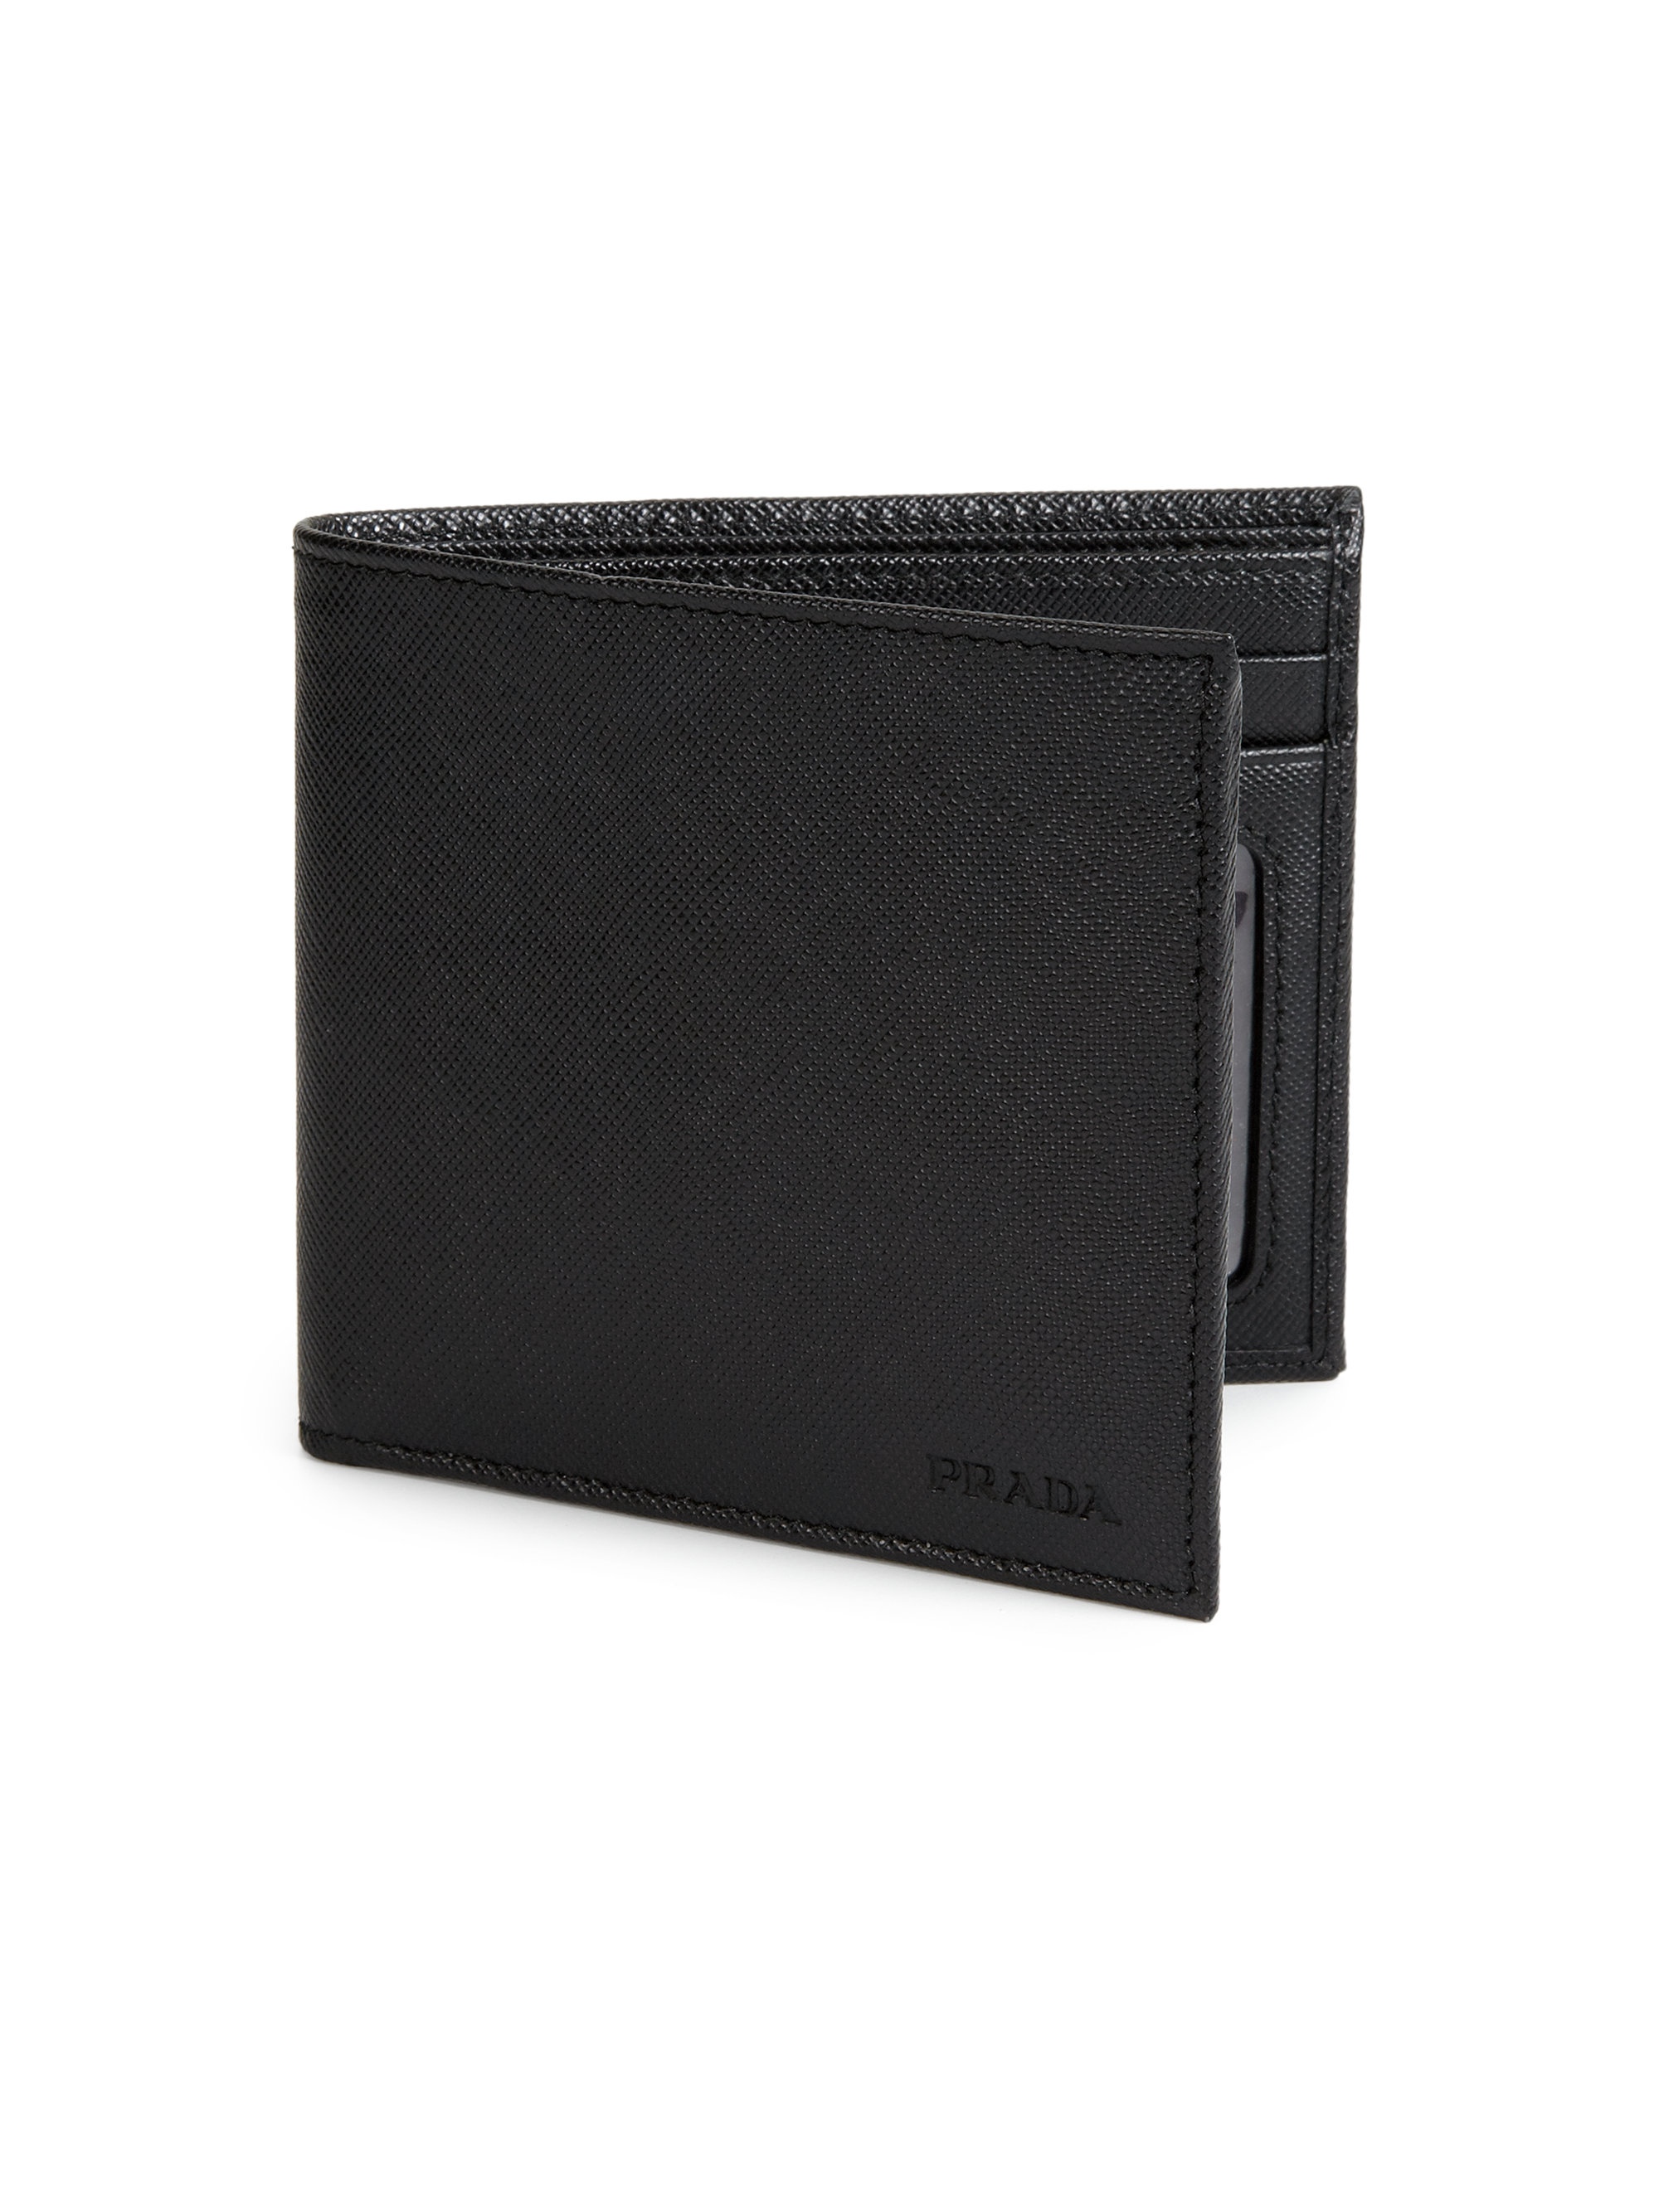 saffiano leather wallet mens